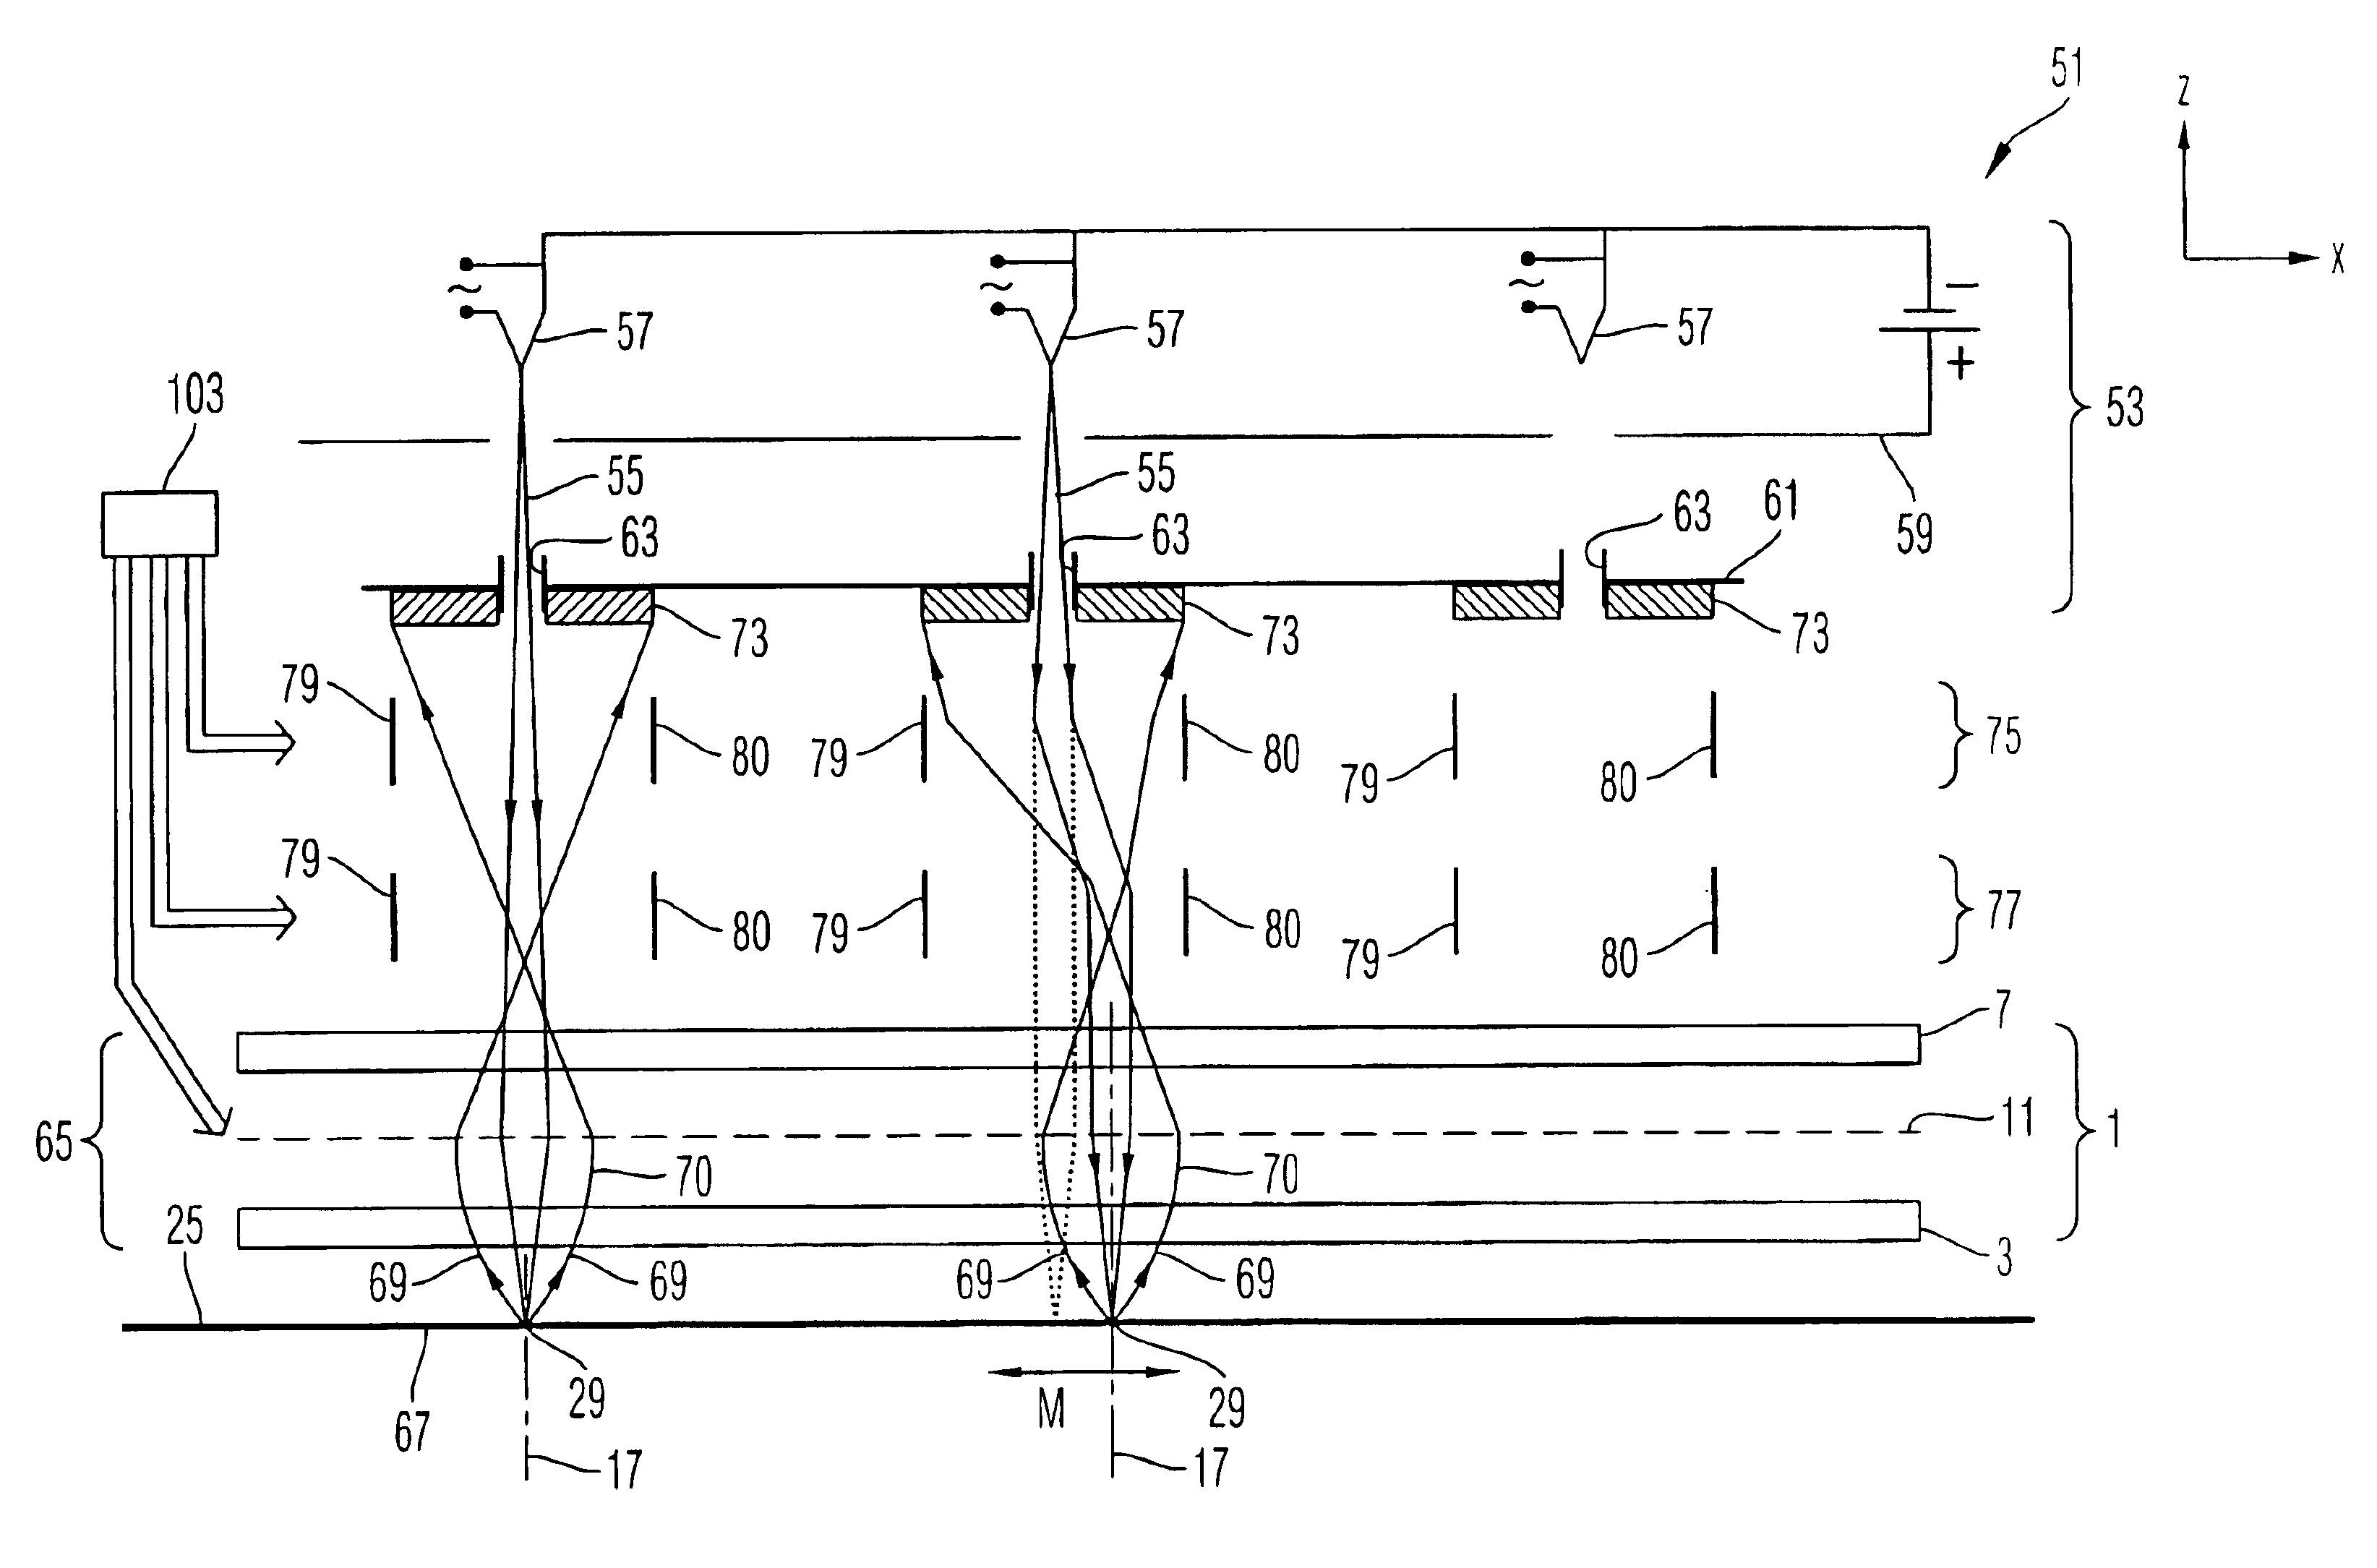 Particle-optical apparatus and method for operating the same